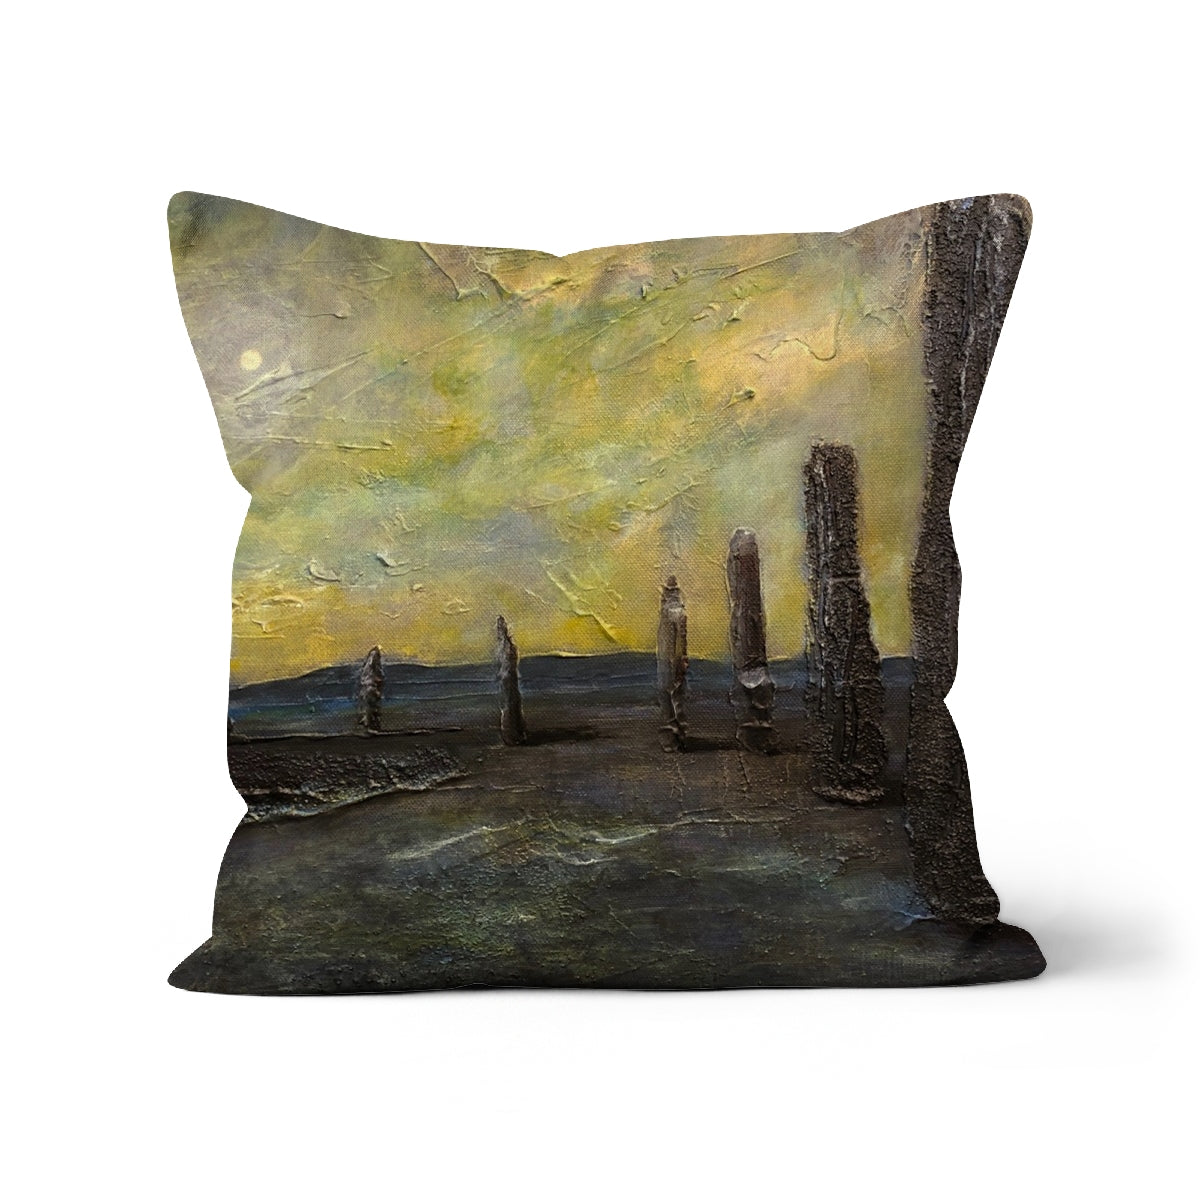 An Ethereal Ring Of Brodgar Art Gifts Cushion-Cushions-Orkney Art Gallery-Canvas-12"x12"-Paintings, Prints, Homeware, Art Gifts From Scotland By Scottish Artist Kevin Hunter